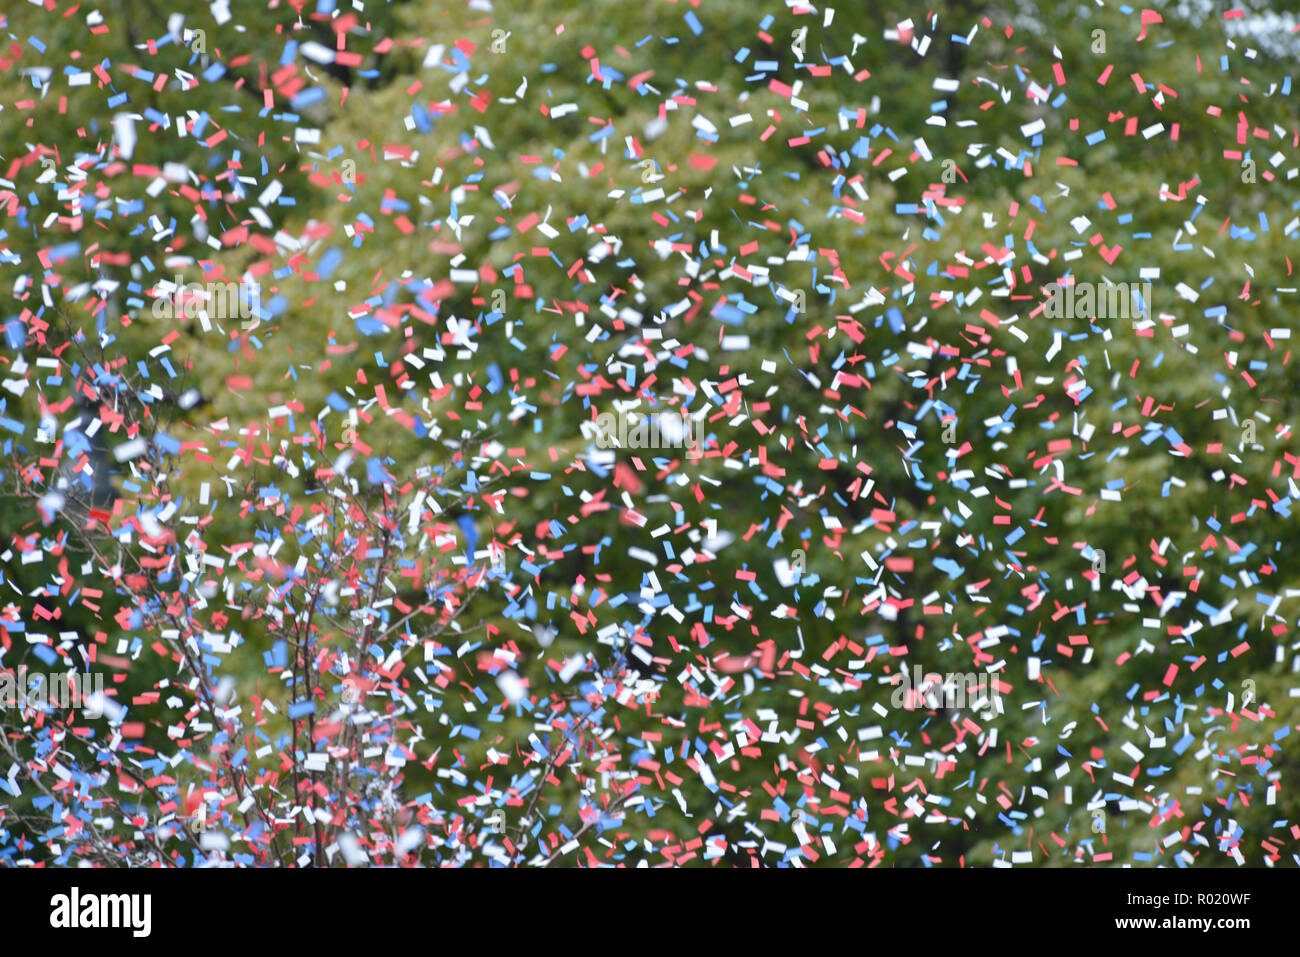 Boston, Massachusetts, USA. 31st Oct, 2018. The Boston Red Sox World Series Victory Parade took place in Boston today with thousands of fans and citizens attending a rolling rally with duckboats through Boston from Fenway Park to Beacon Hill. The Red Sox defeated the Los Angeles Dodgers for the title of World Series Champions. Credit: Kenneth Martin/ZUMA Wire/Alamy Live News Stock Photo